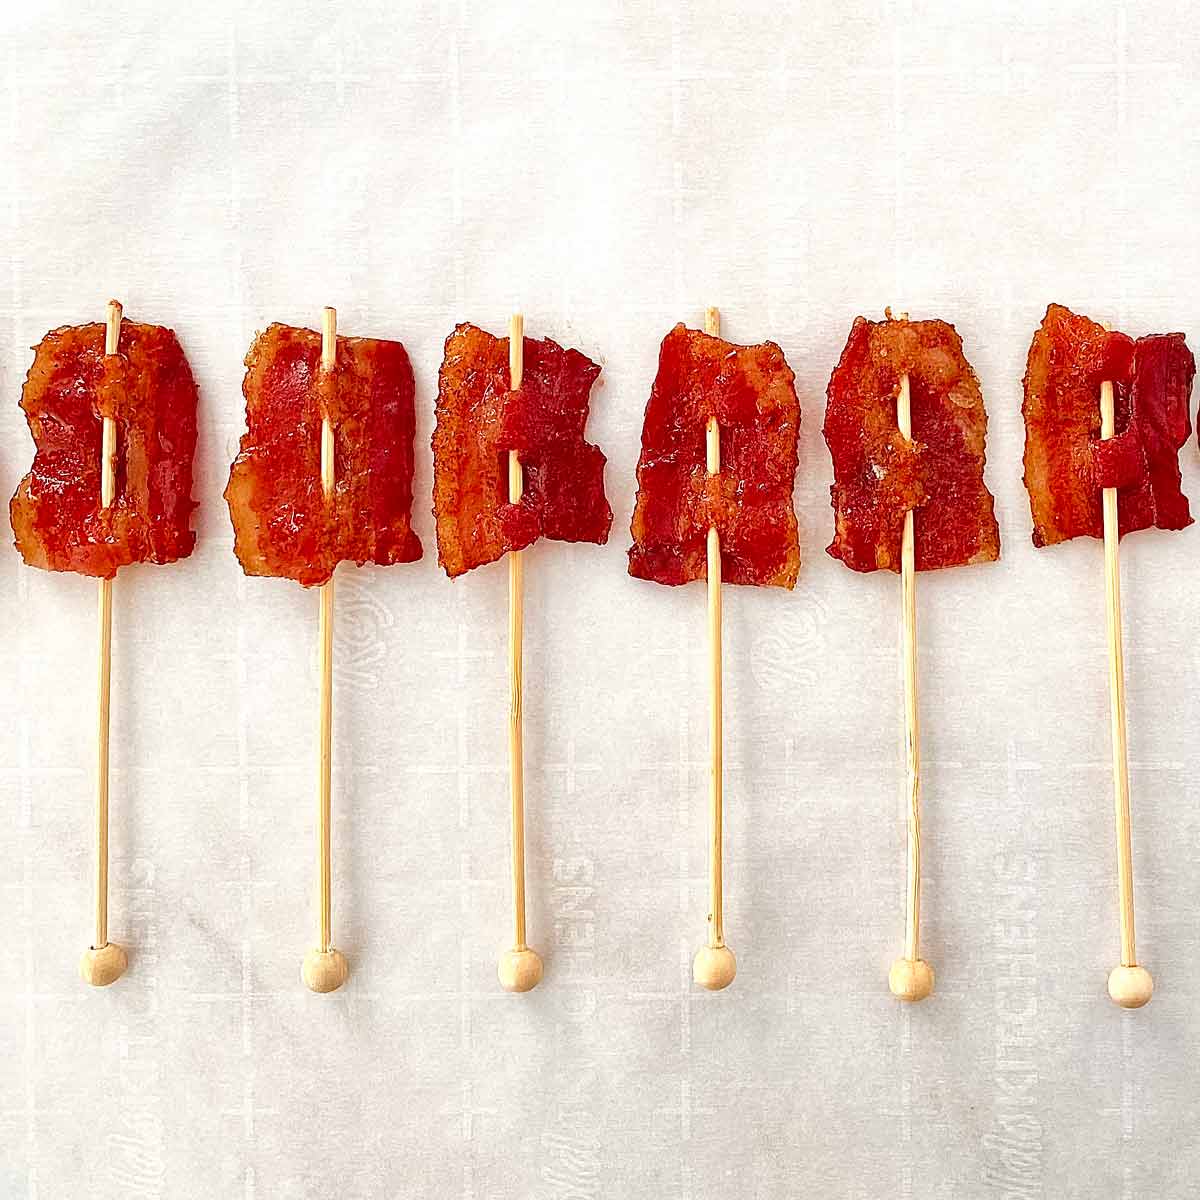 Six homemade candied bacon lollipops on wooden sticks on parchment paper.